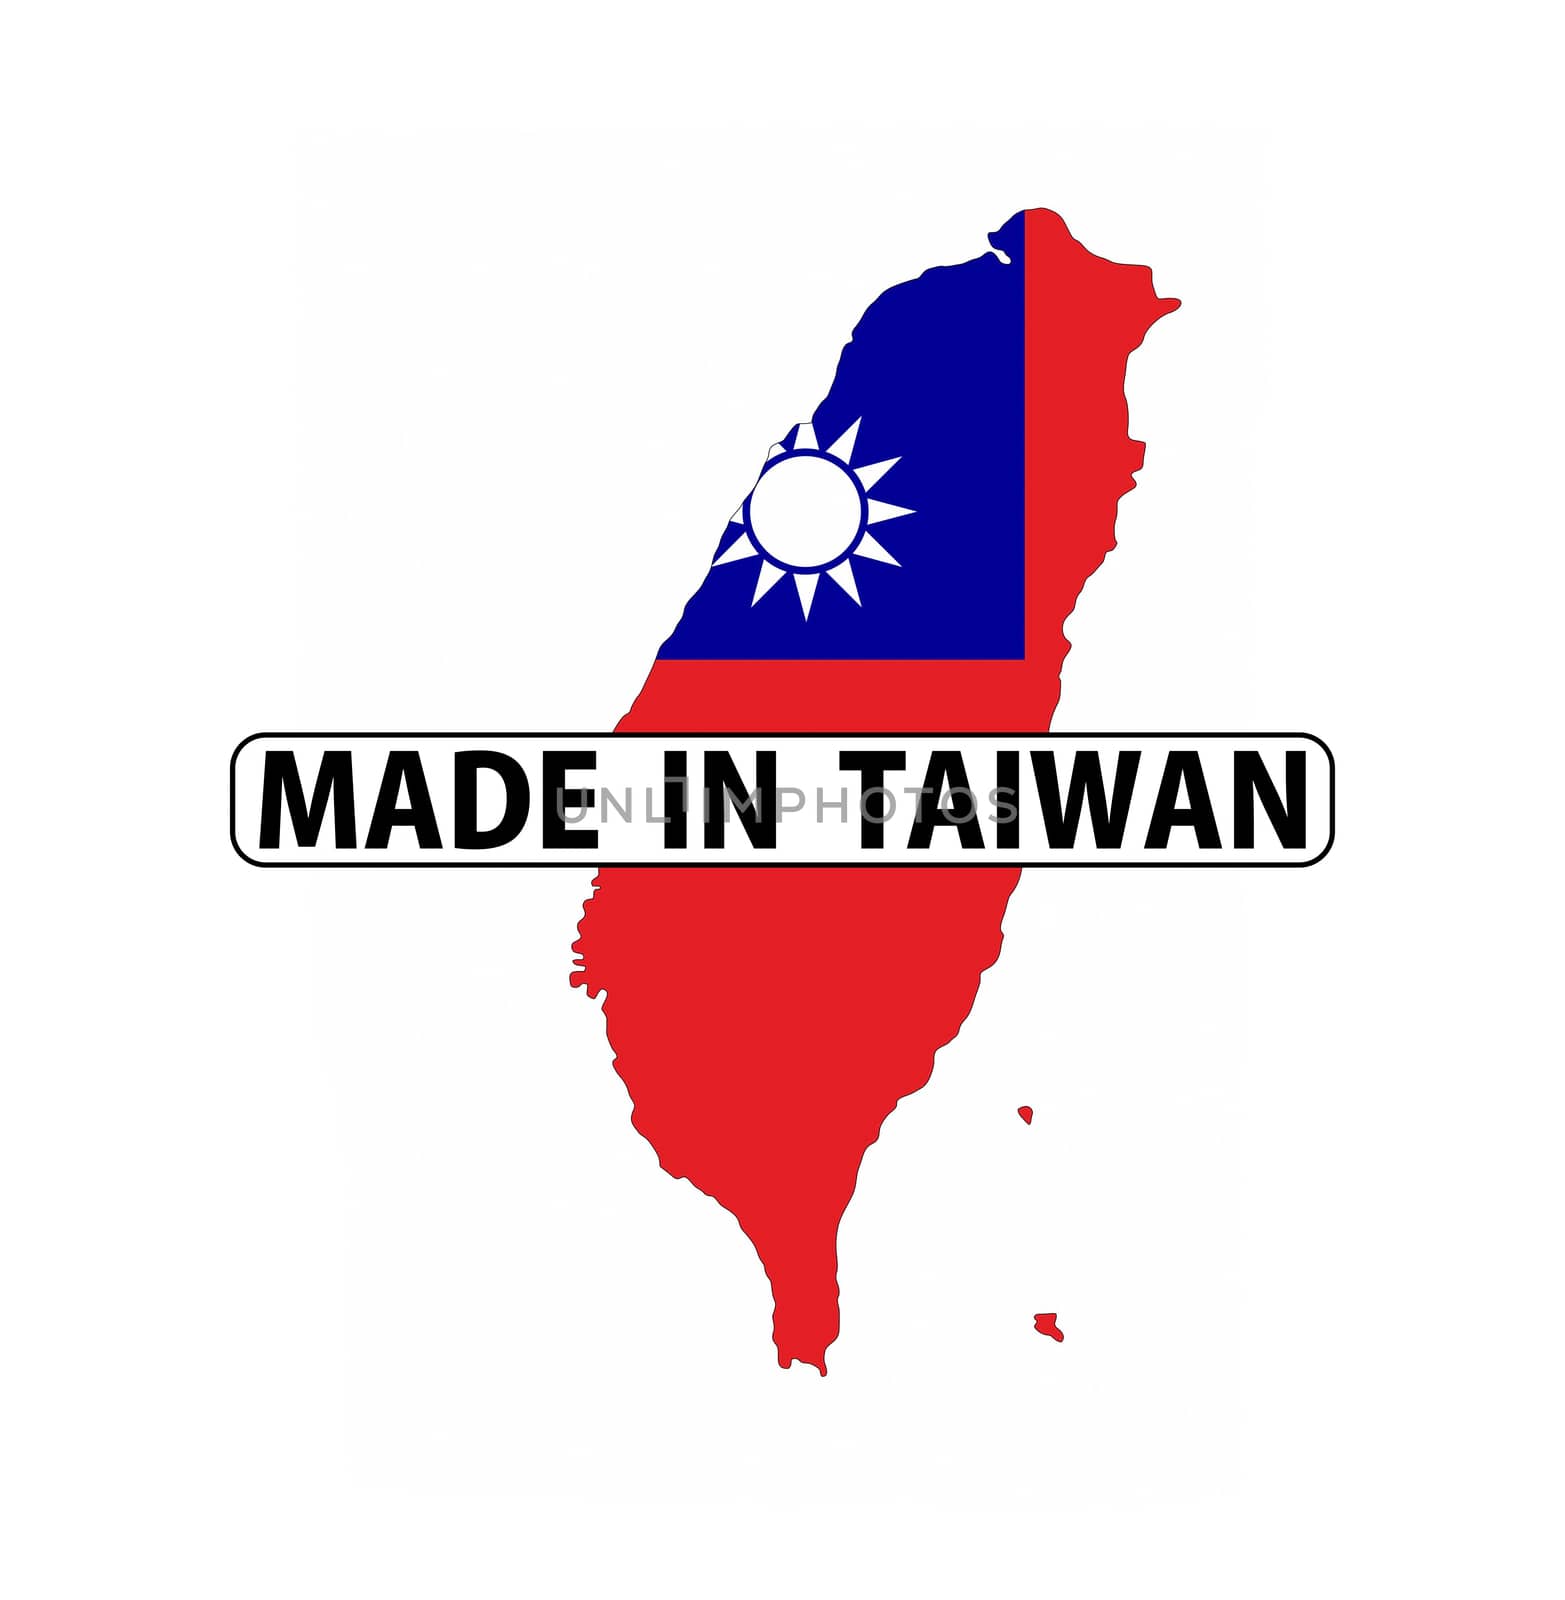 made in taiwan country national flag map shape with text